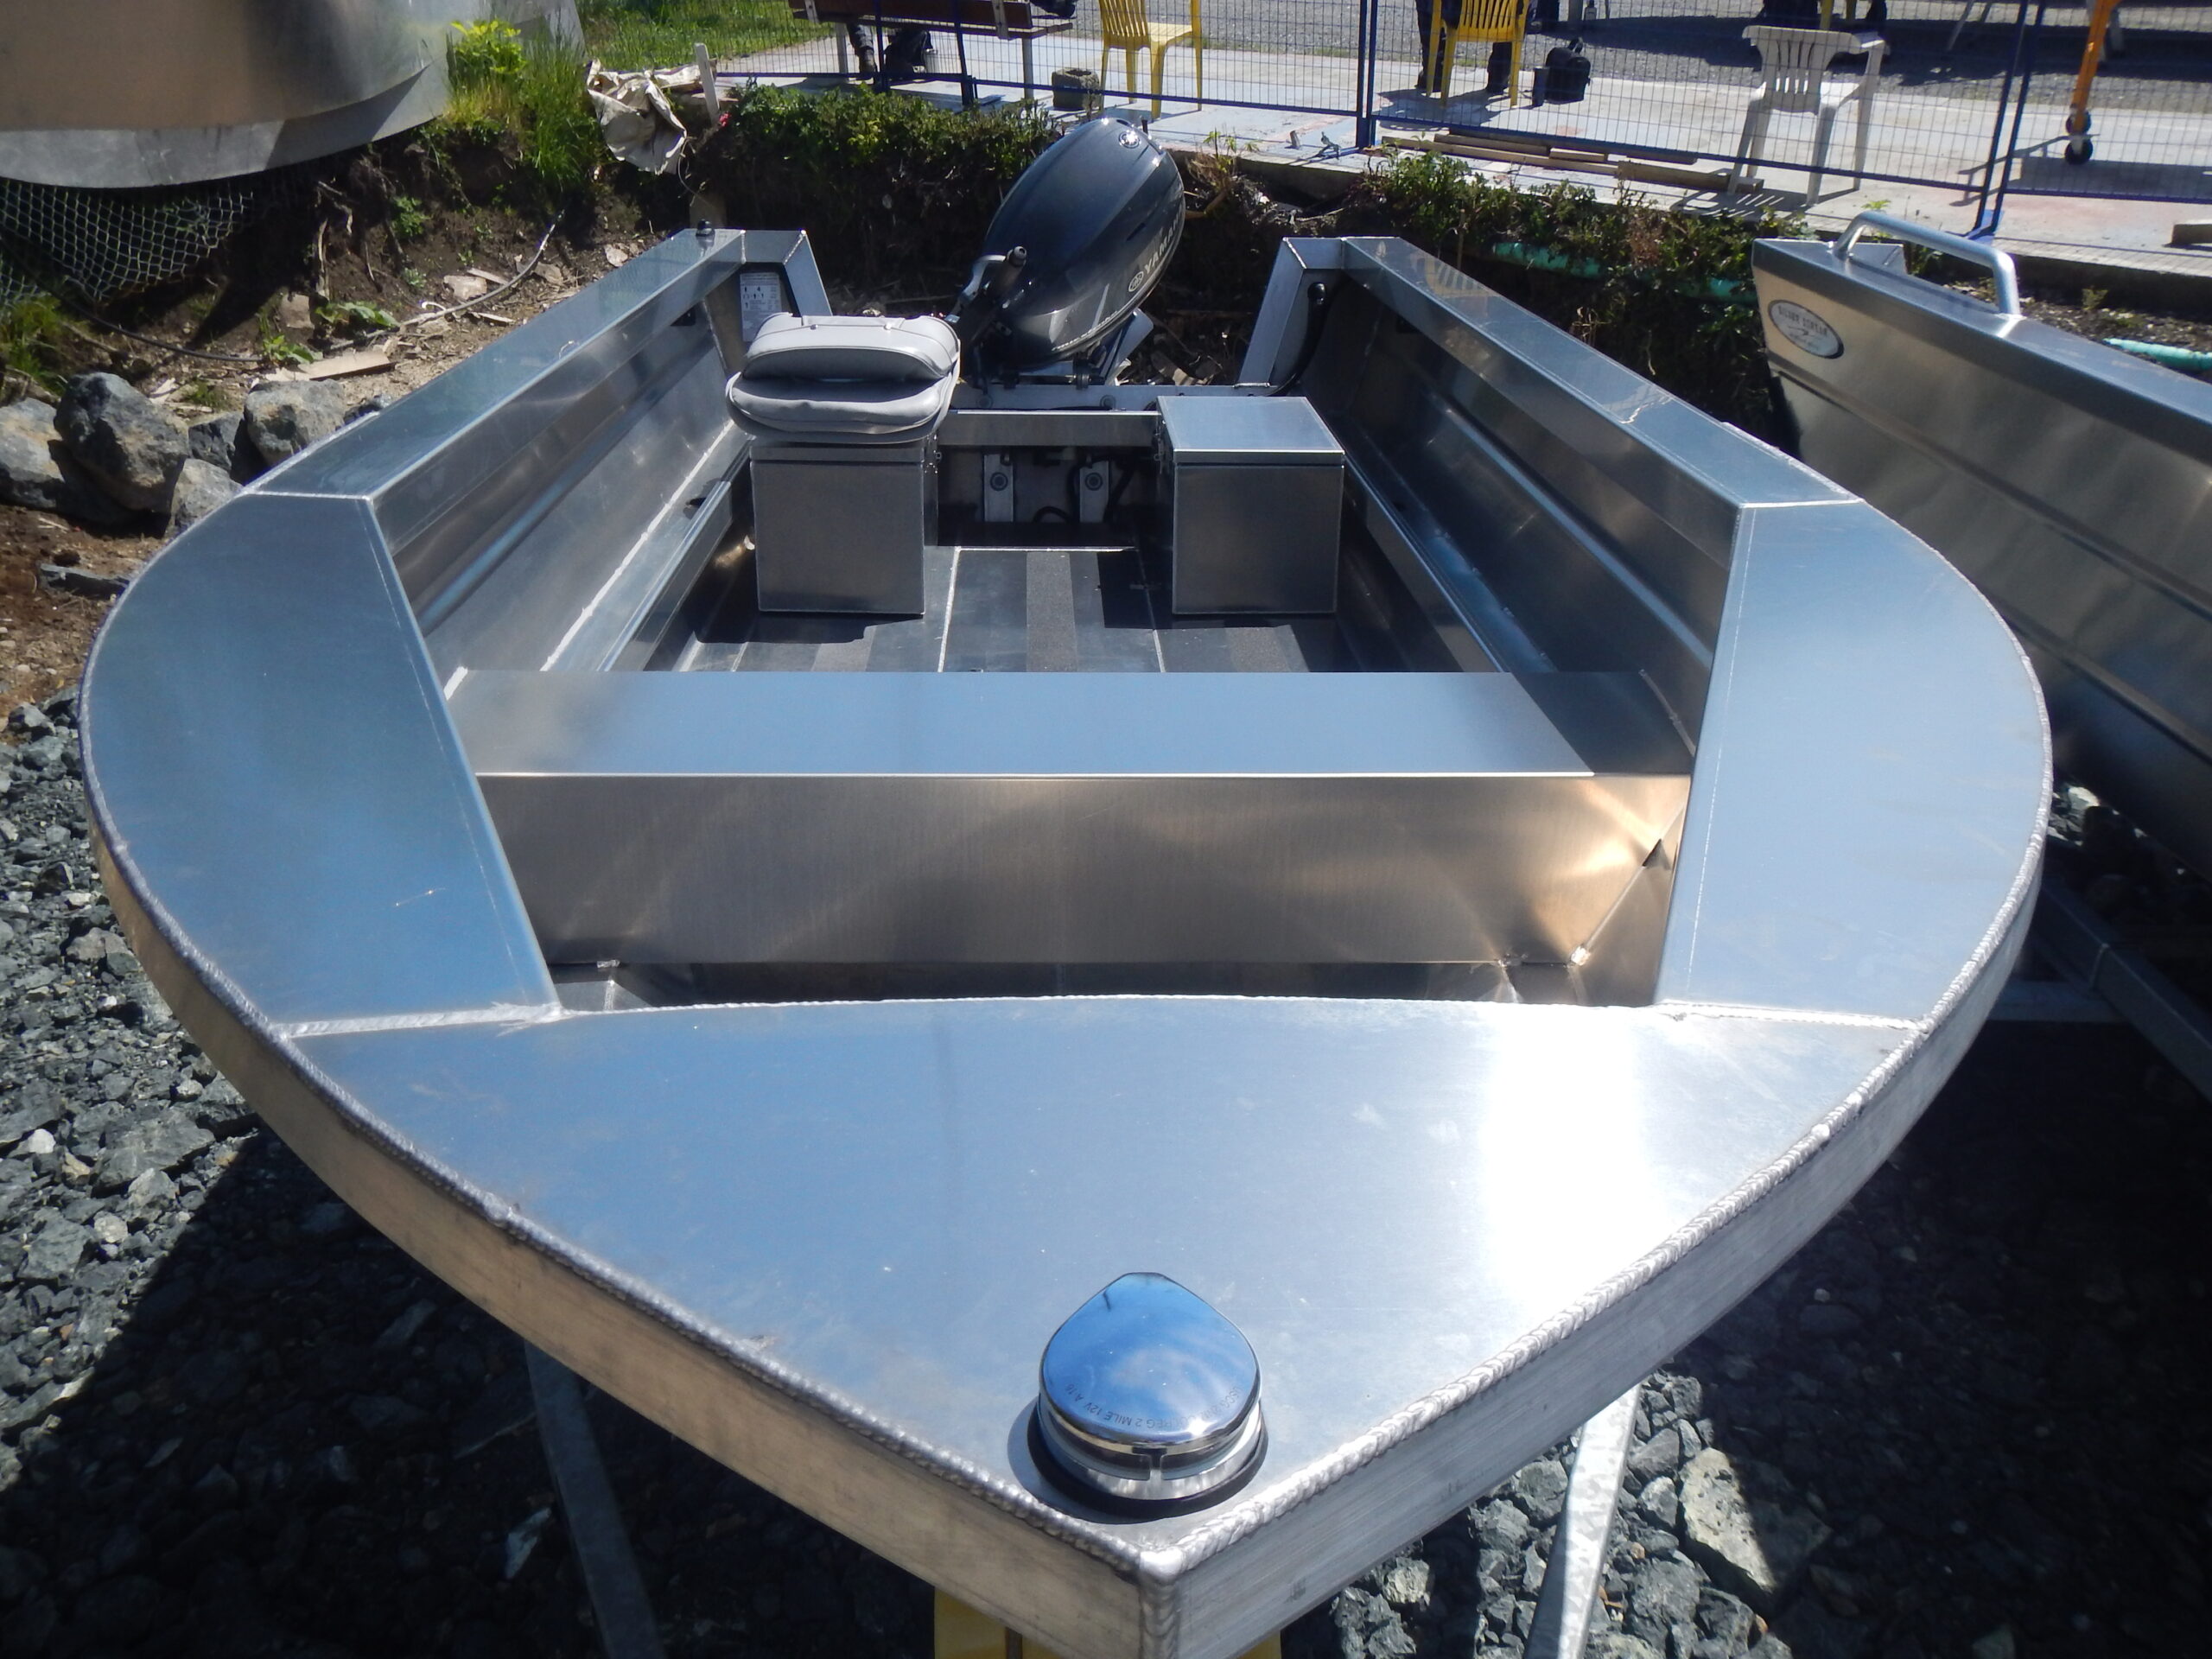 Best way to mount rod holders on 15' aluminum boat?